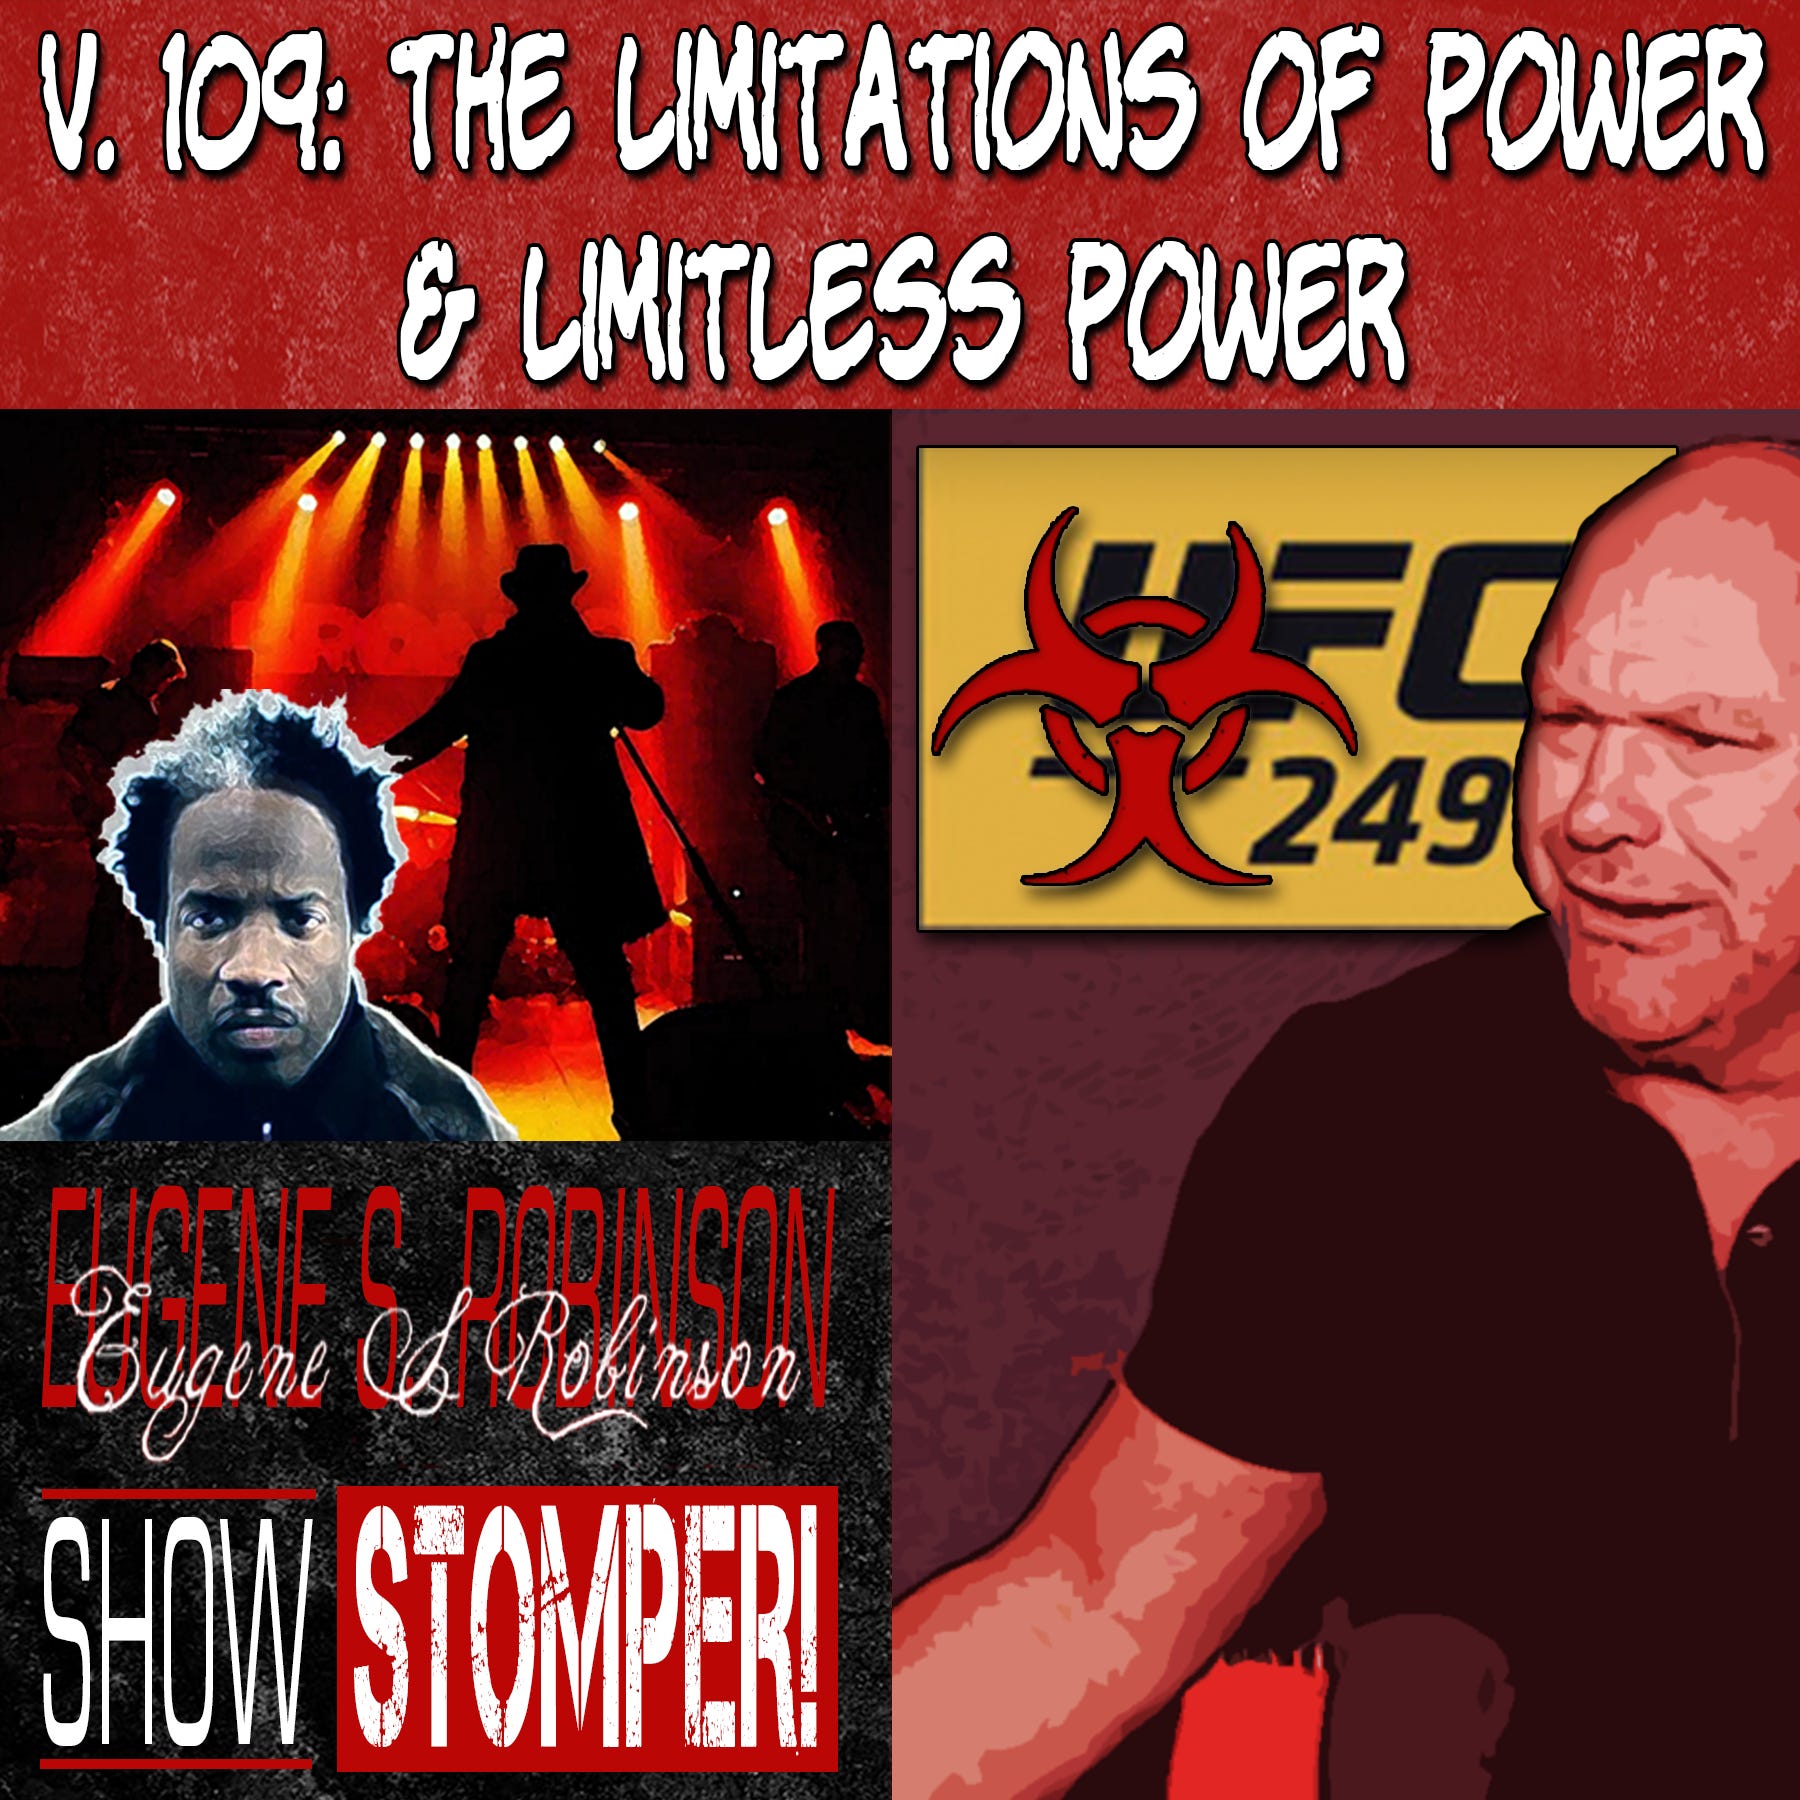 V.109 The Limitations Of Power + Limitless Power On The Eugene S. Robinson Show Stomper!